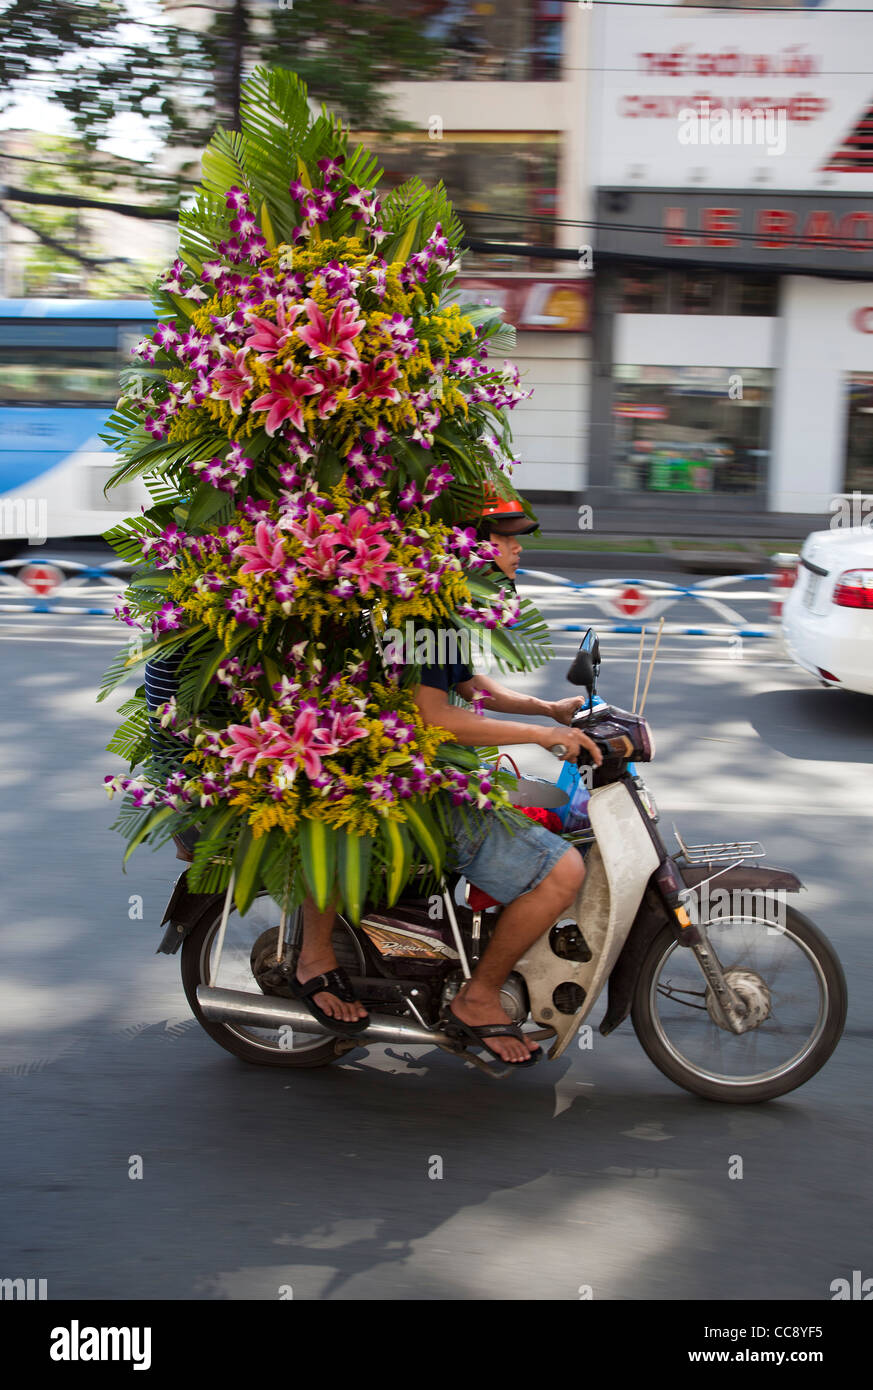 Motorbike overloaded with Plants or Flowers in Ho Chi Minh City Vietnam Stock Photo